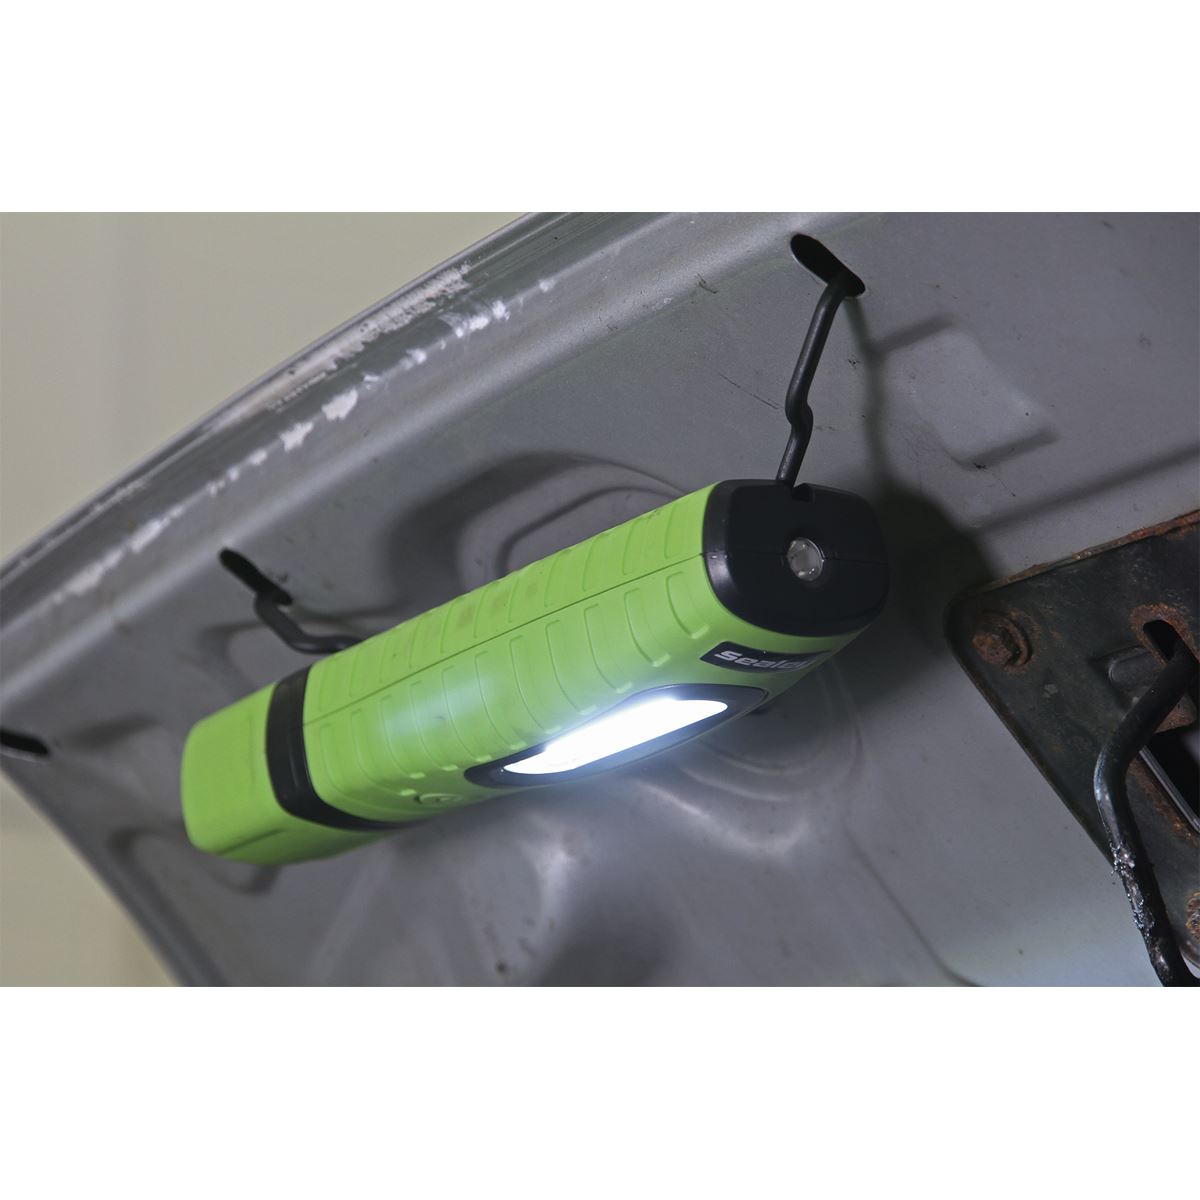 Sealey Rechargeable 360° Inspection Light 10W & 3W SMD LED Green 2 x Lithium-ion